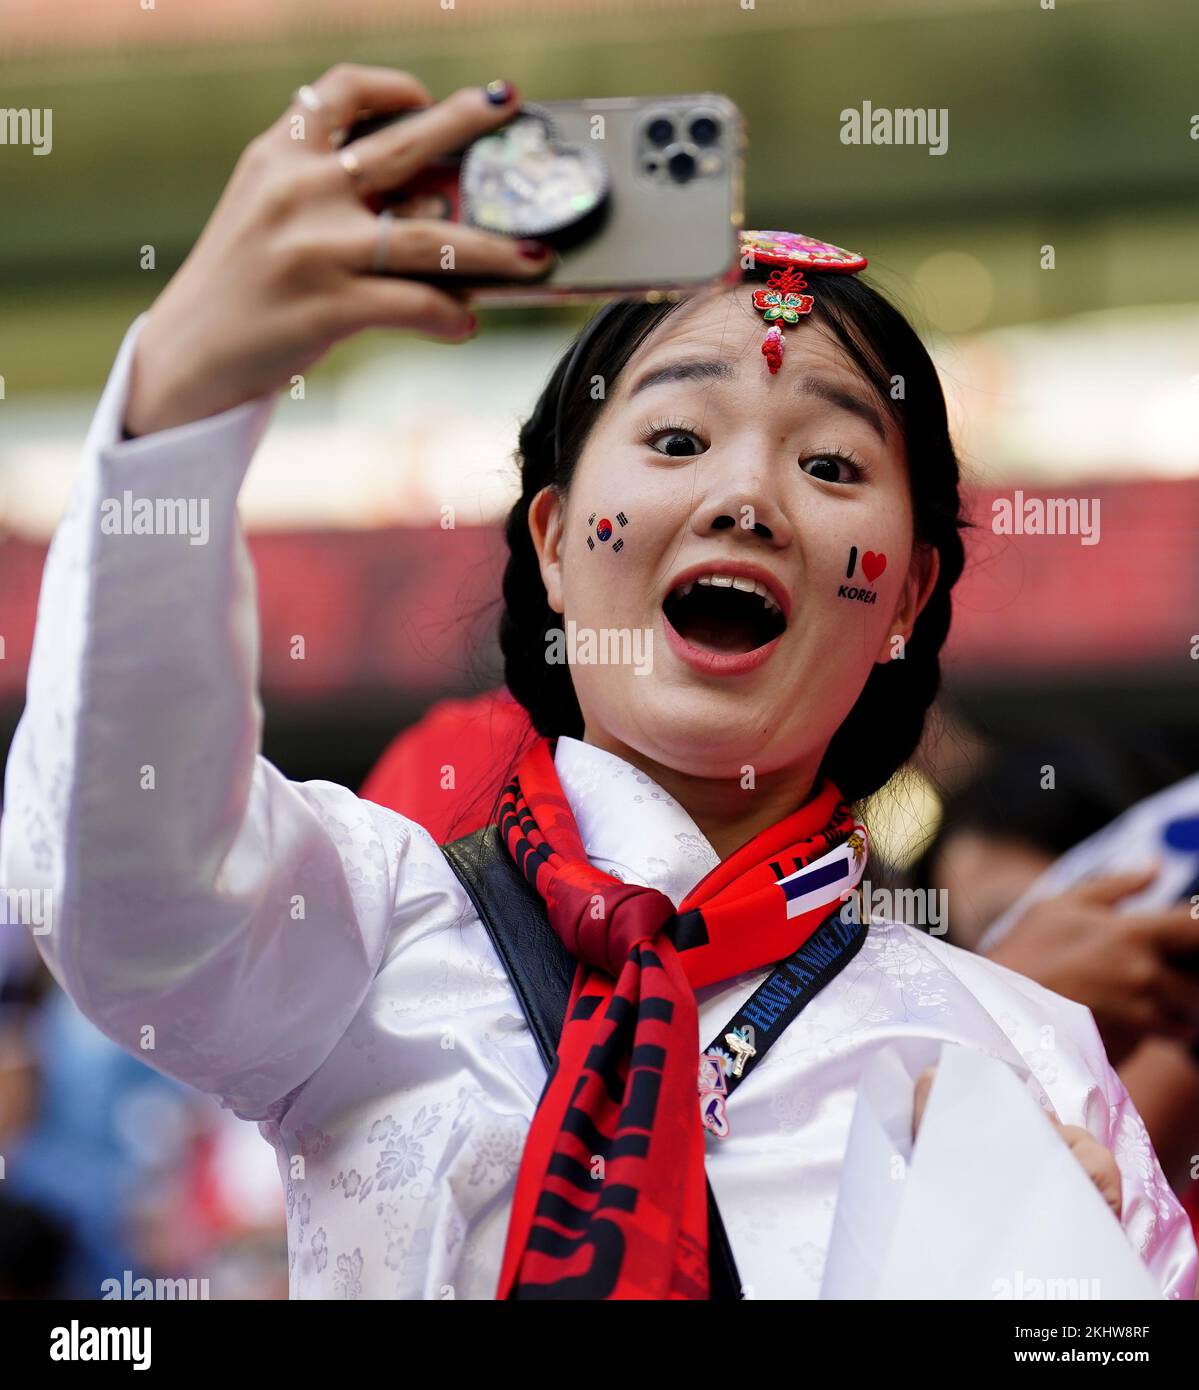 South Korea's fans ahead of the FIFA World Cup Group H match at the Education City Stadium, Doha, Qatar. Picture date: Thursday November 24, 2022. Stock Photo